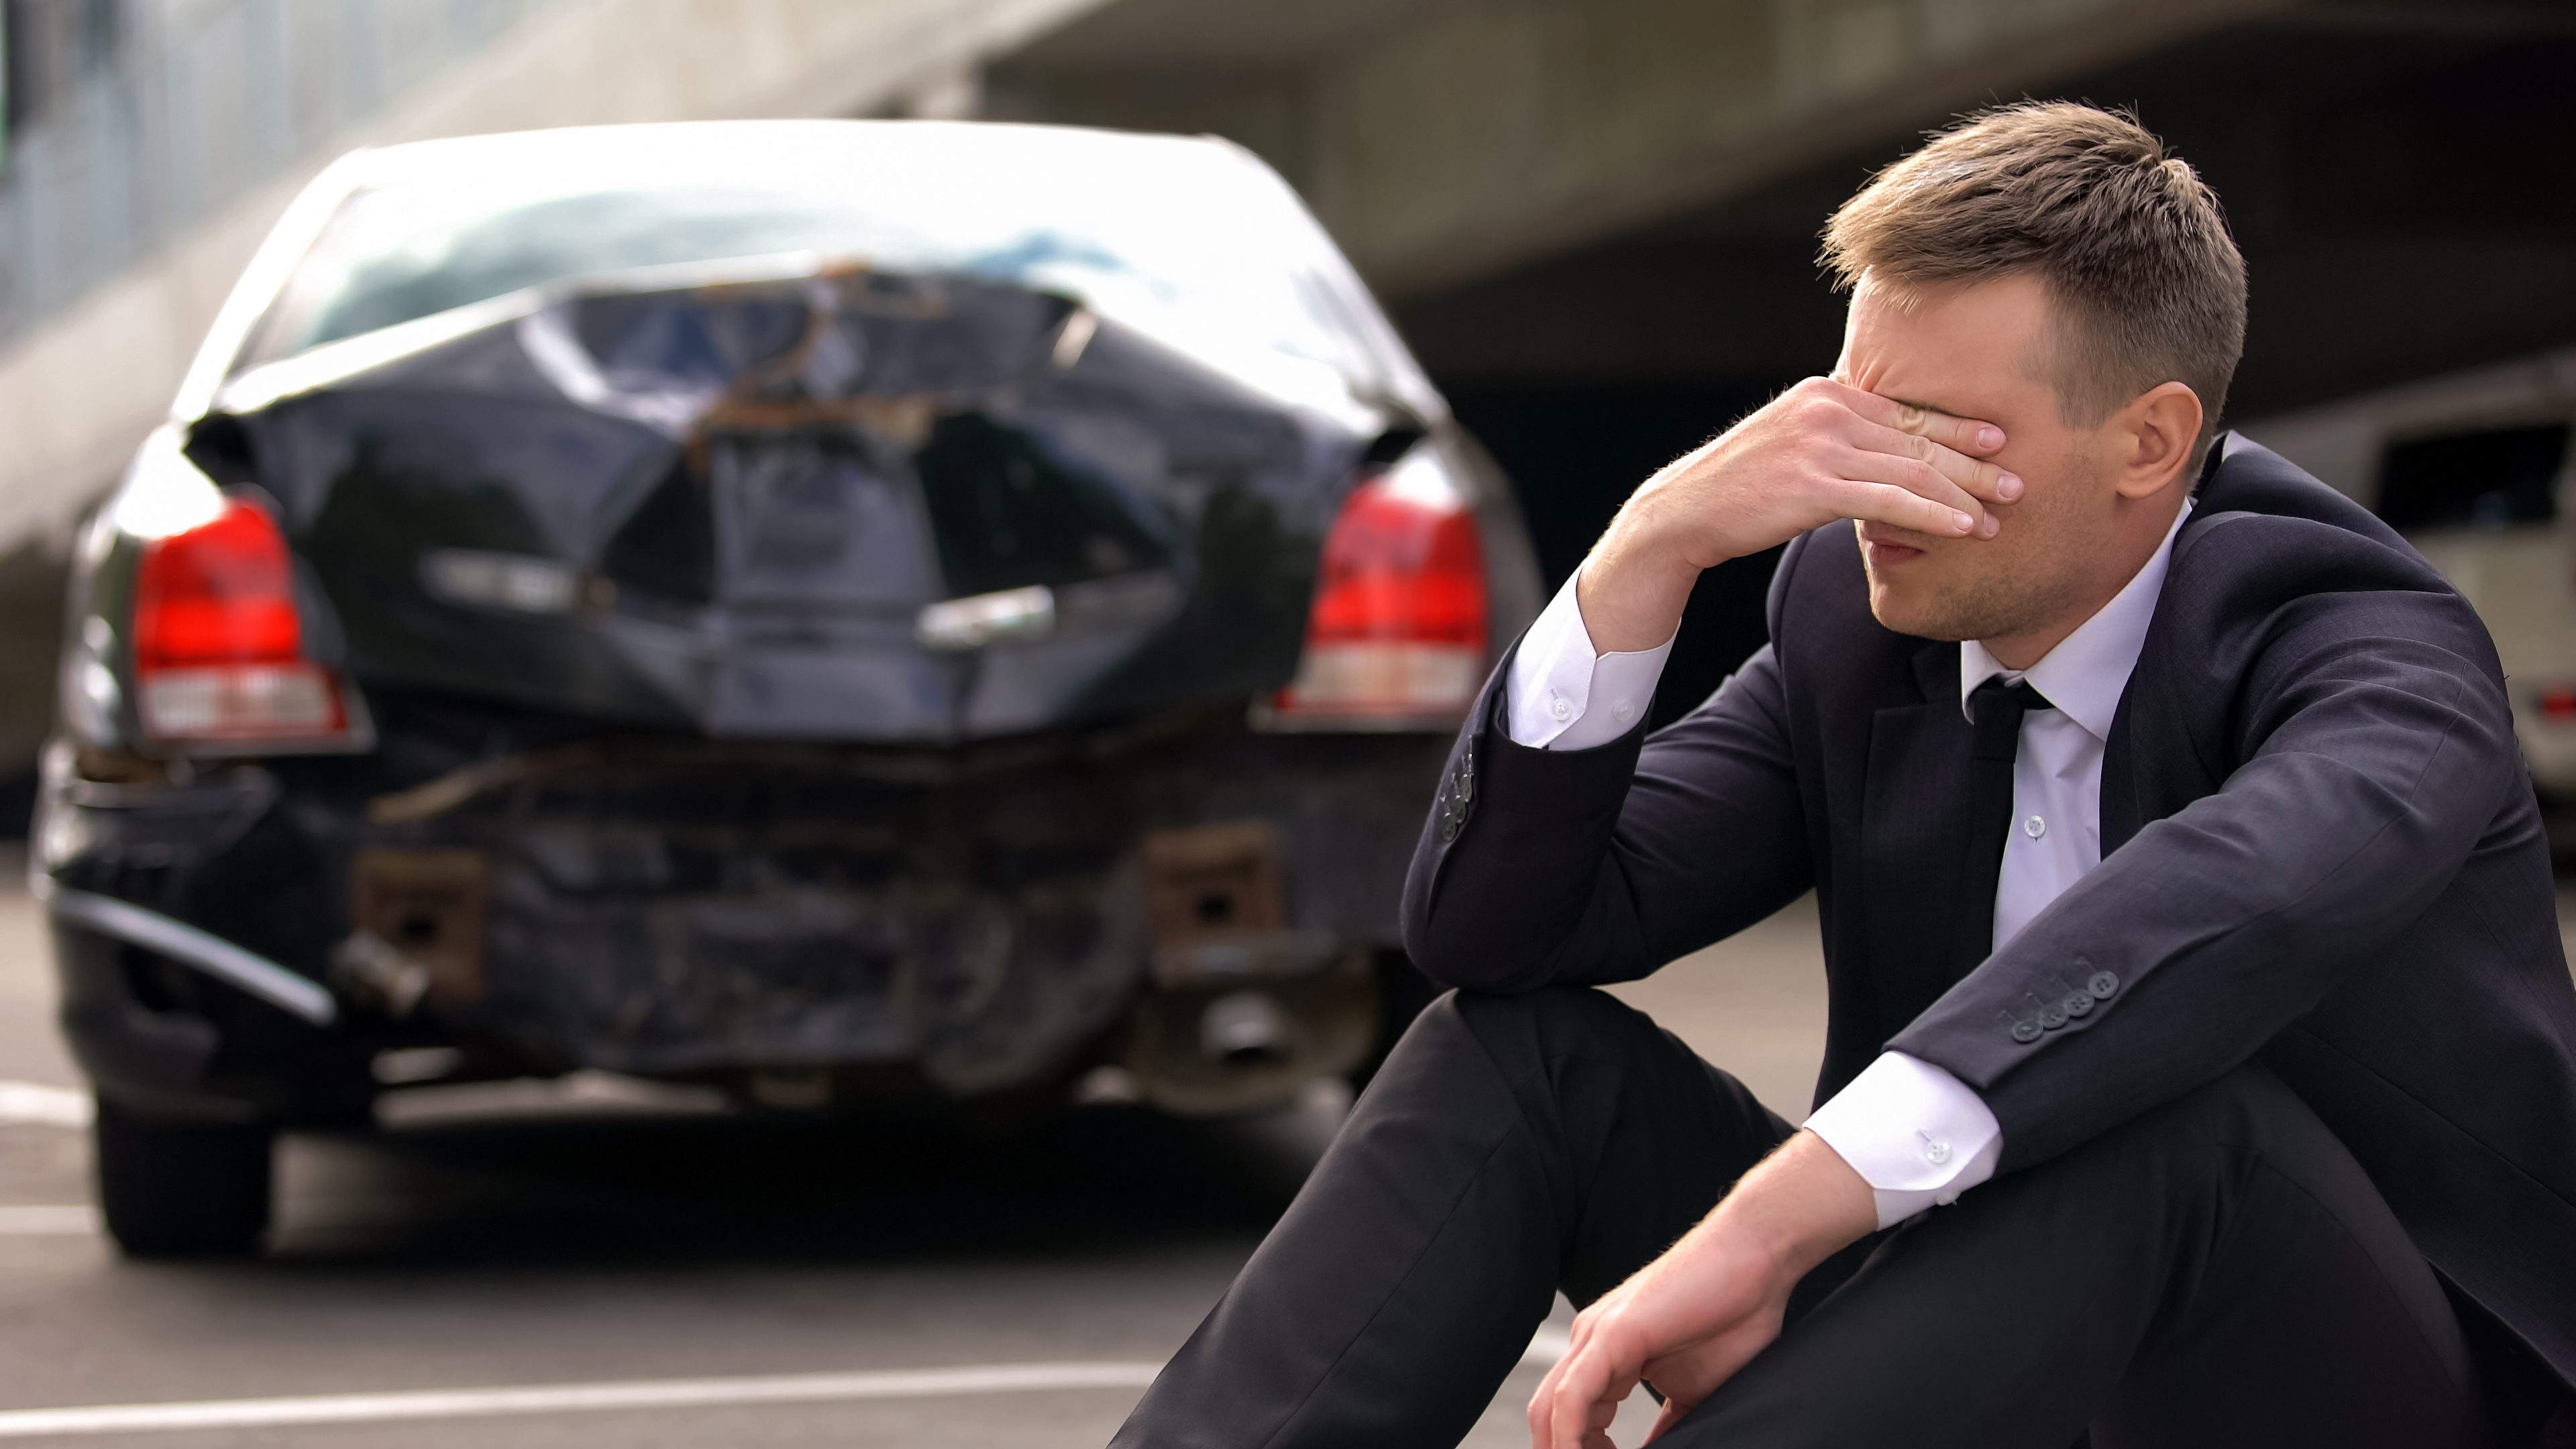 Personal Injury Accident Lawyer